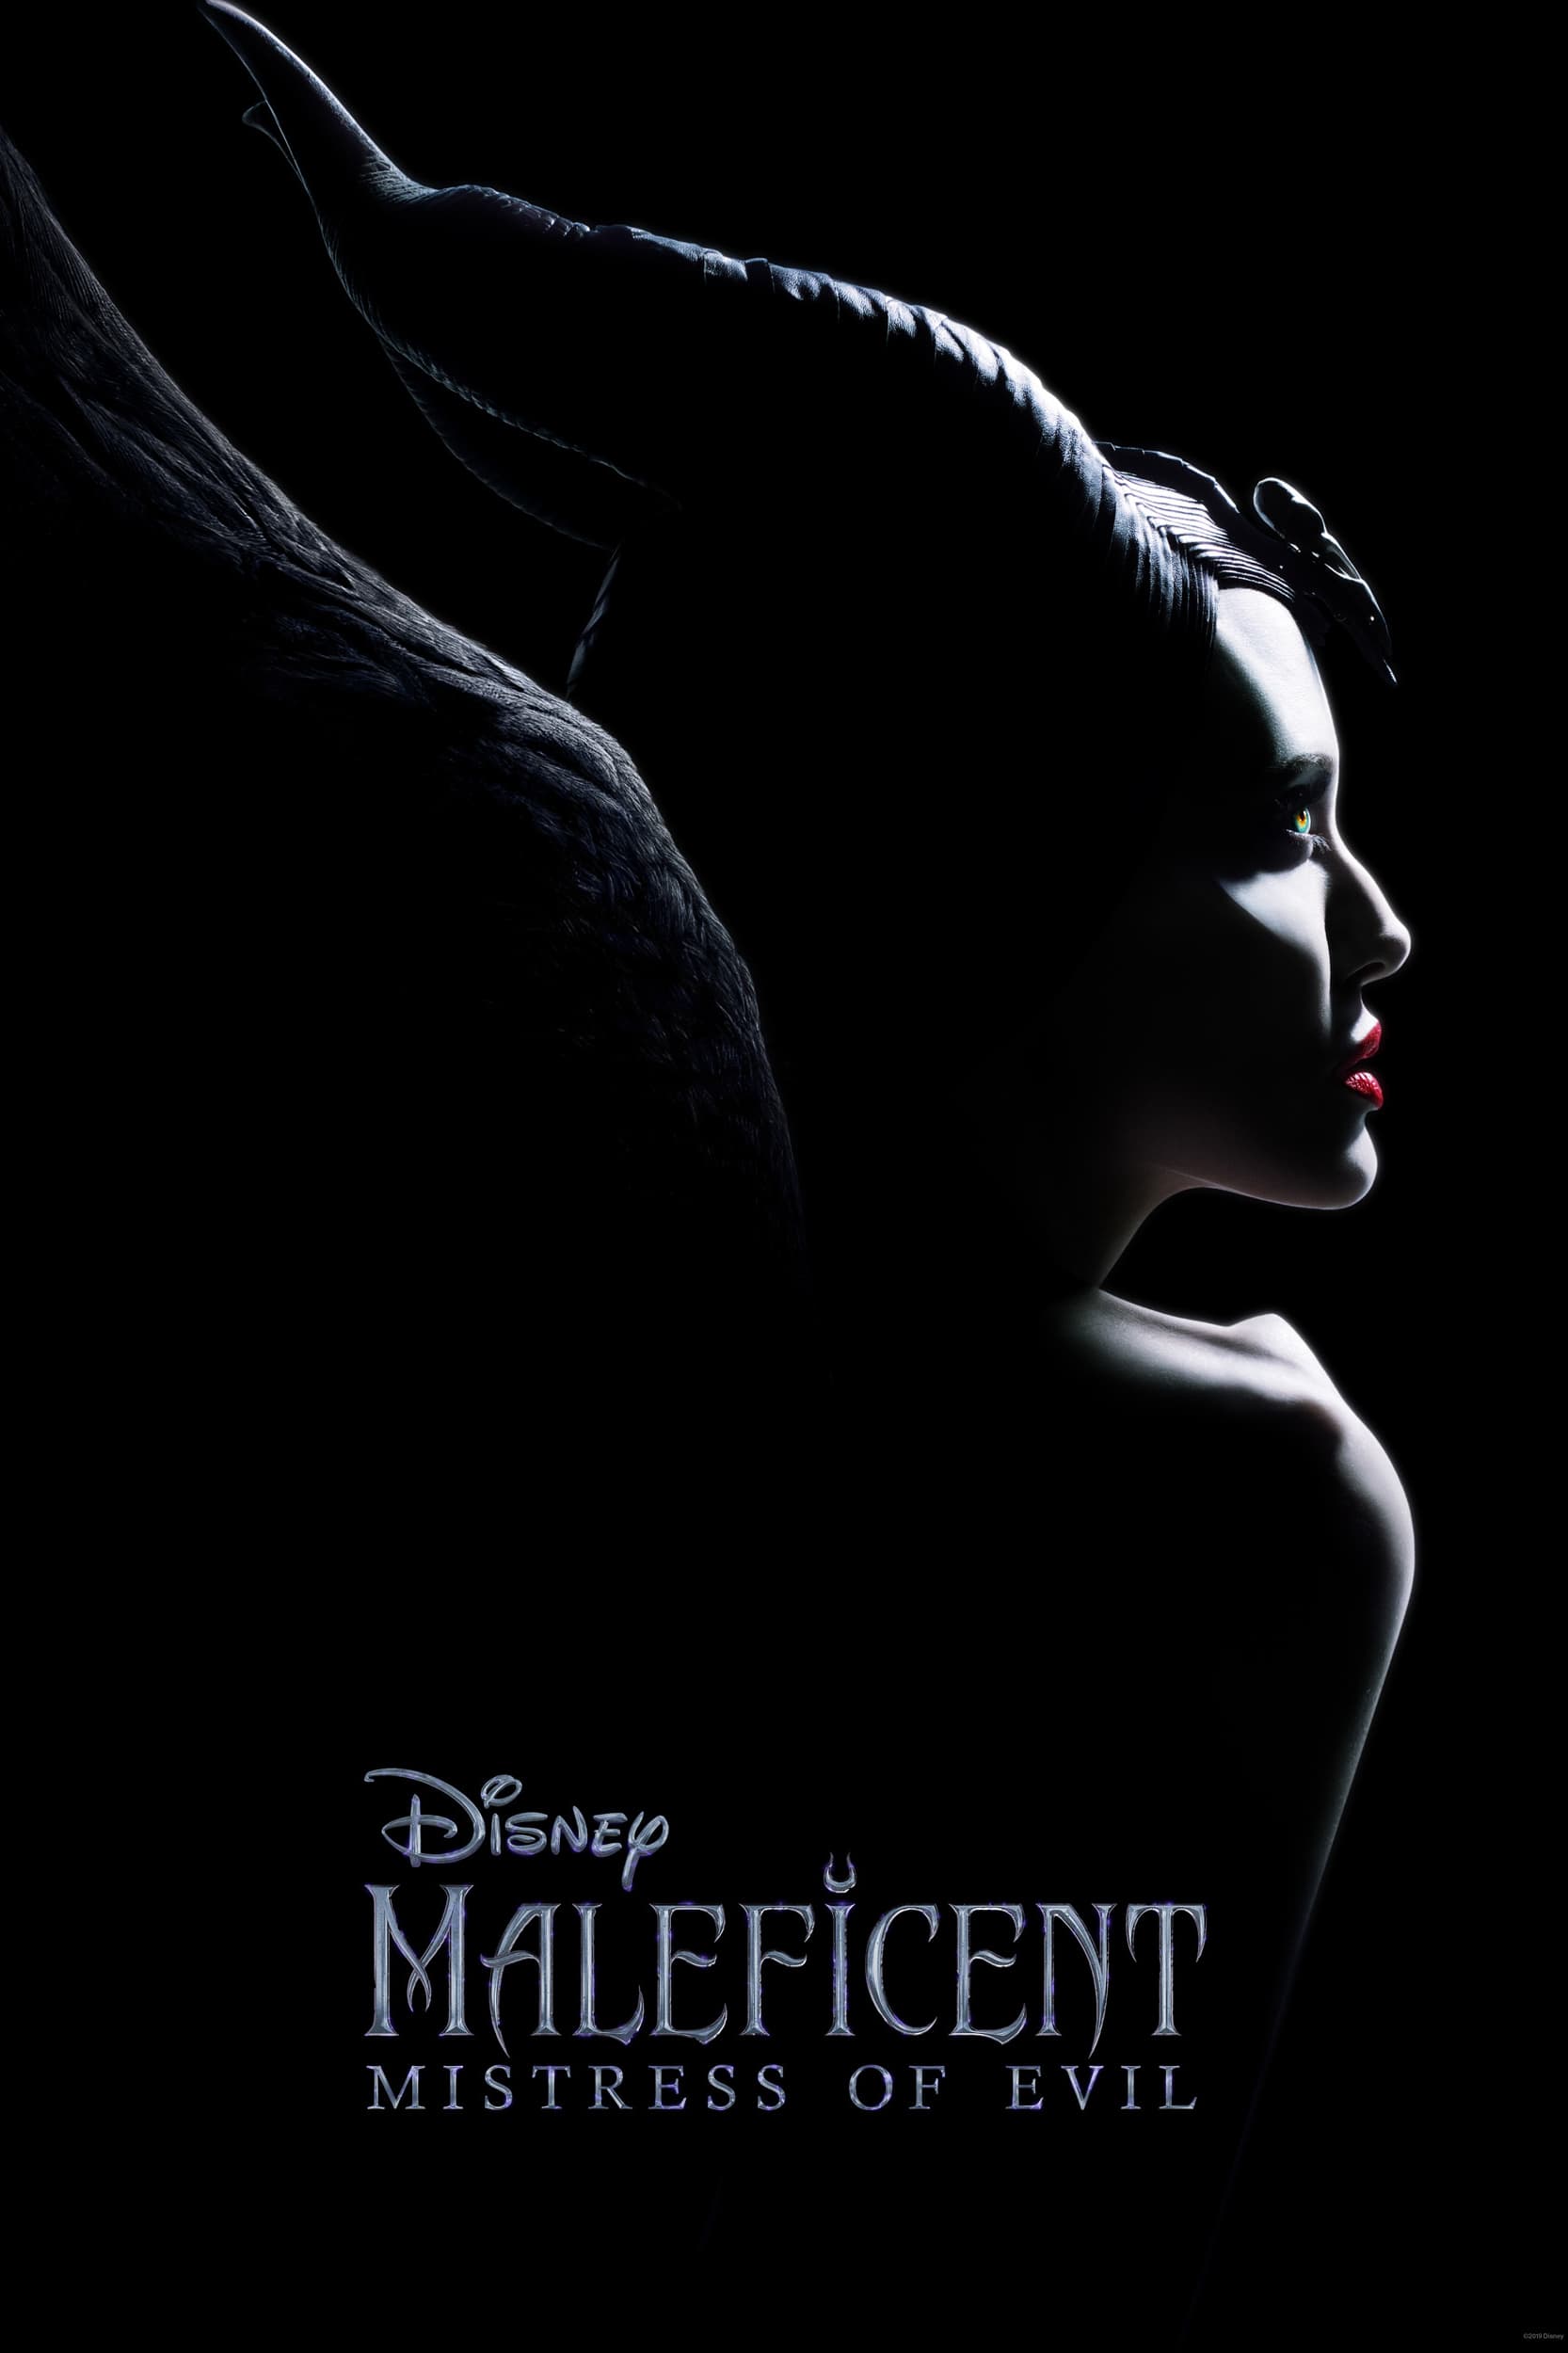 Maleficent: Mistress of Evil (2019) Official Trailer #1